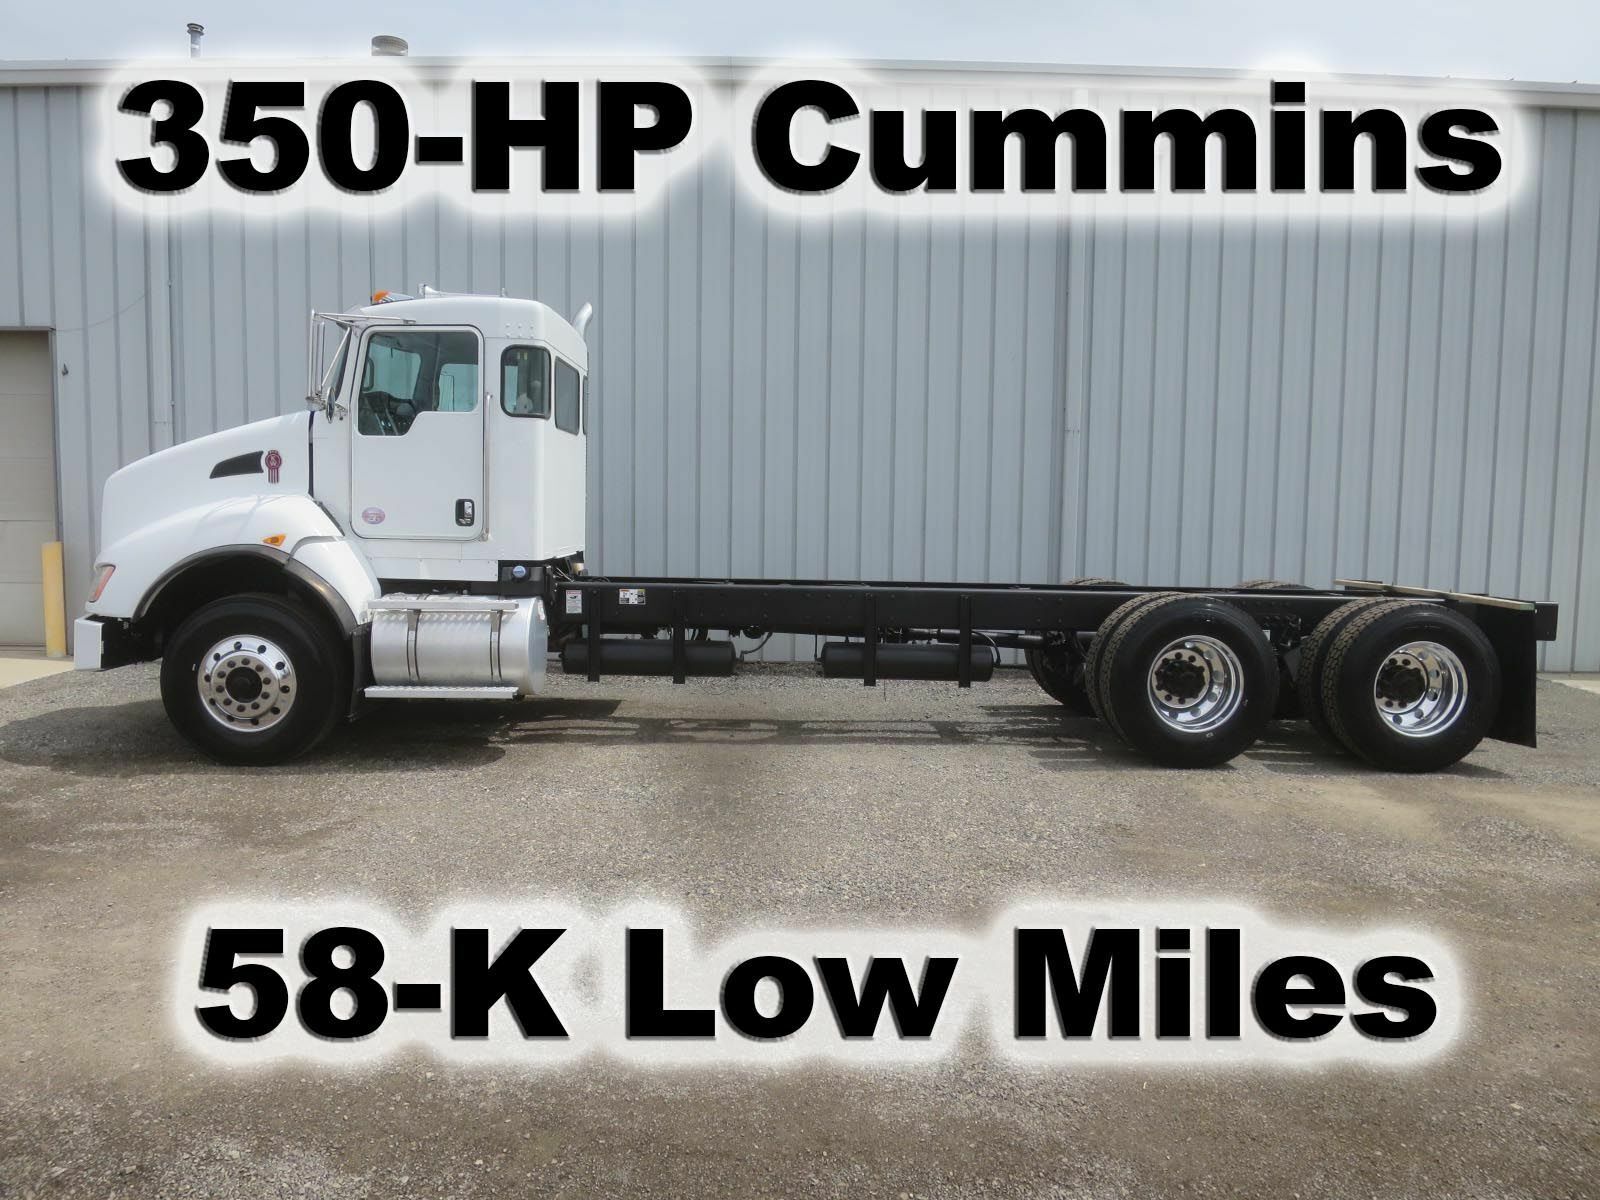 T400 350-hp Cummins 8-ll Cab Chassis Straight Frame Tandem Axle Truck 58-k Mile